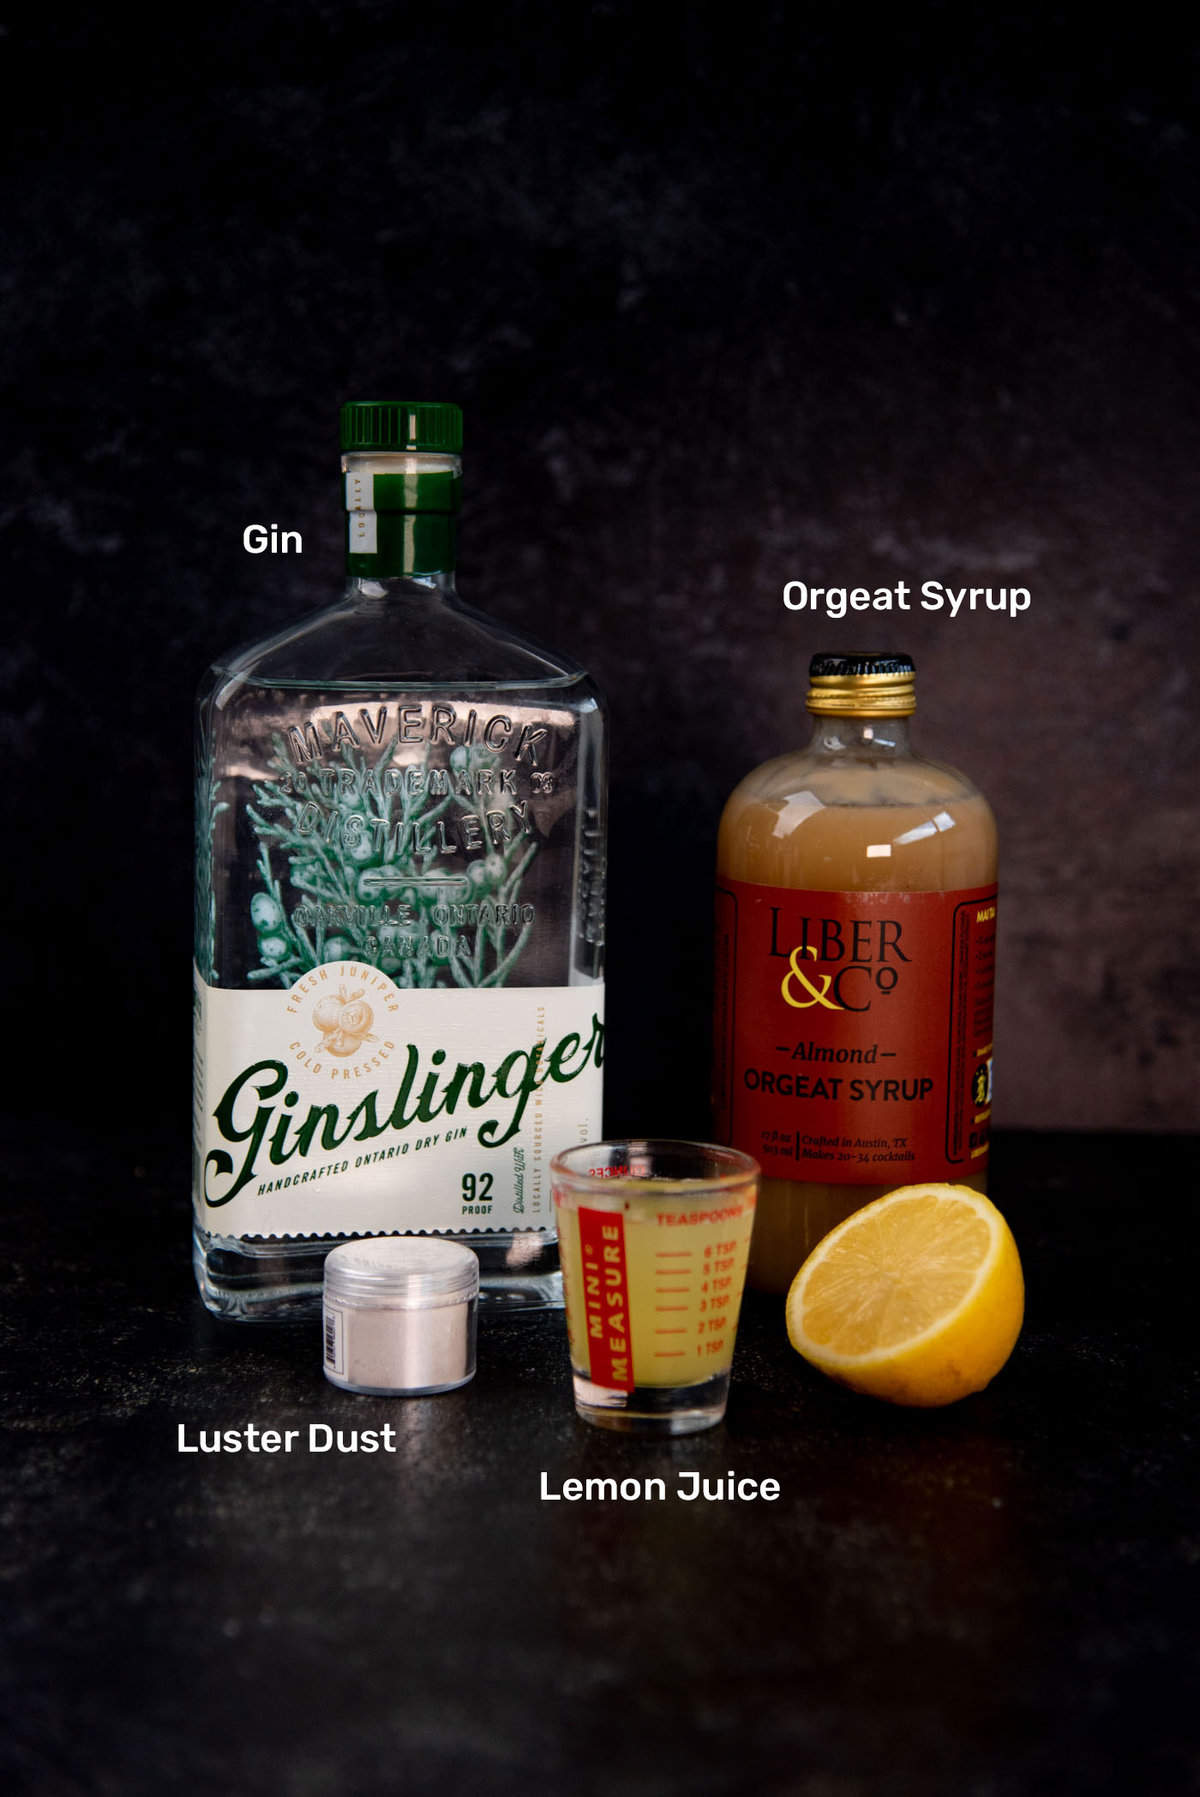 Ingredients to make Unicorn Blood Cocktail from left to right - Gin, Silver luster dust, lemon juice and orgeat syrup.